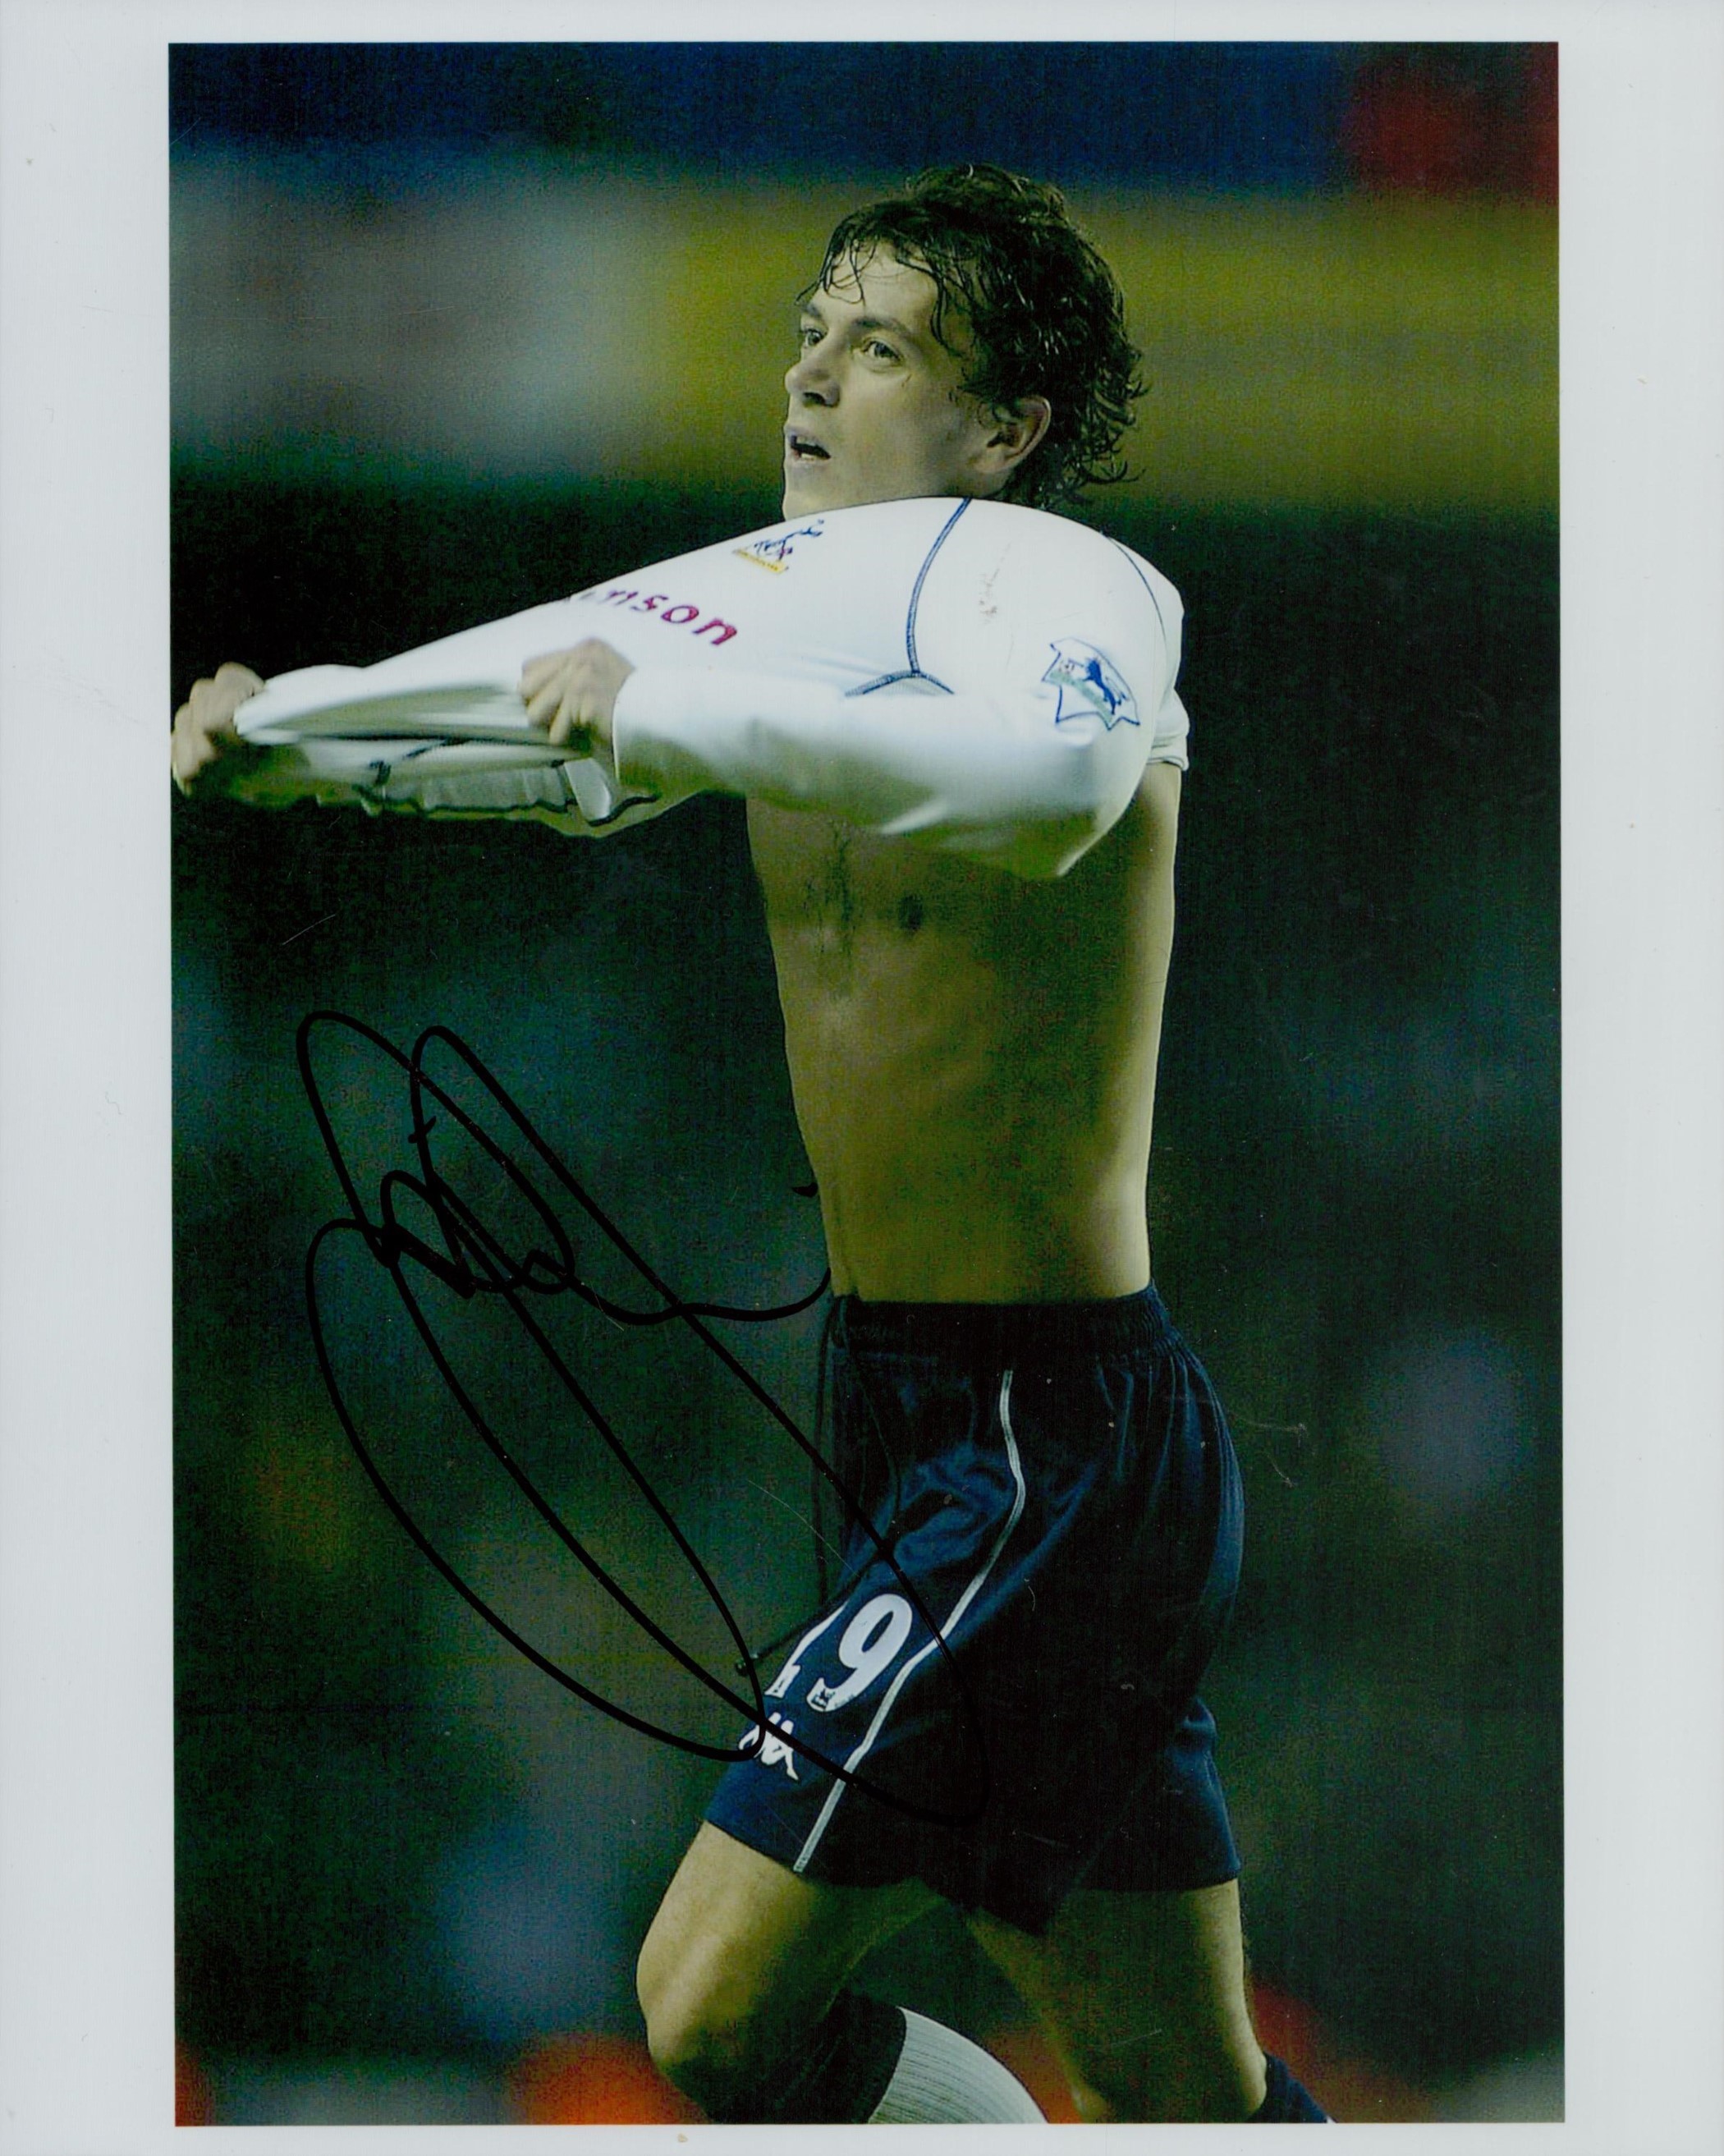 Simon Davies signed Colour Photo 10x8 Inch. Is a Welsh former professional footballer who played